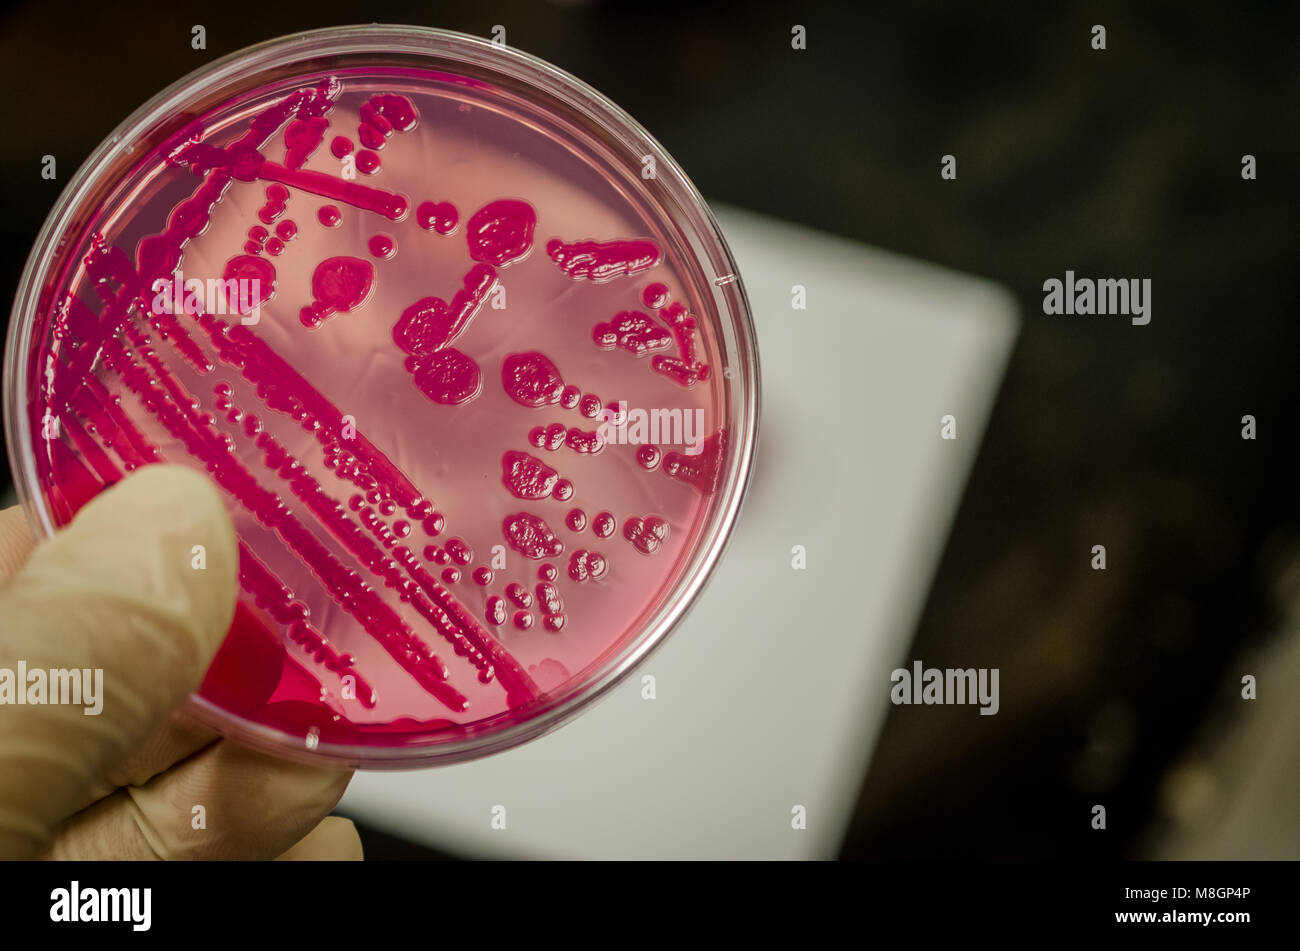 Bacterial culture plate holding in hand Stock Photo